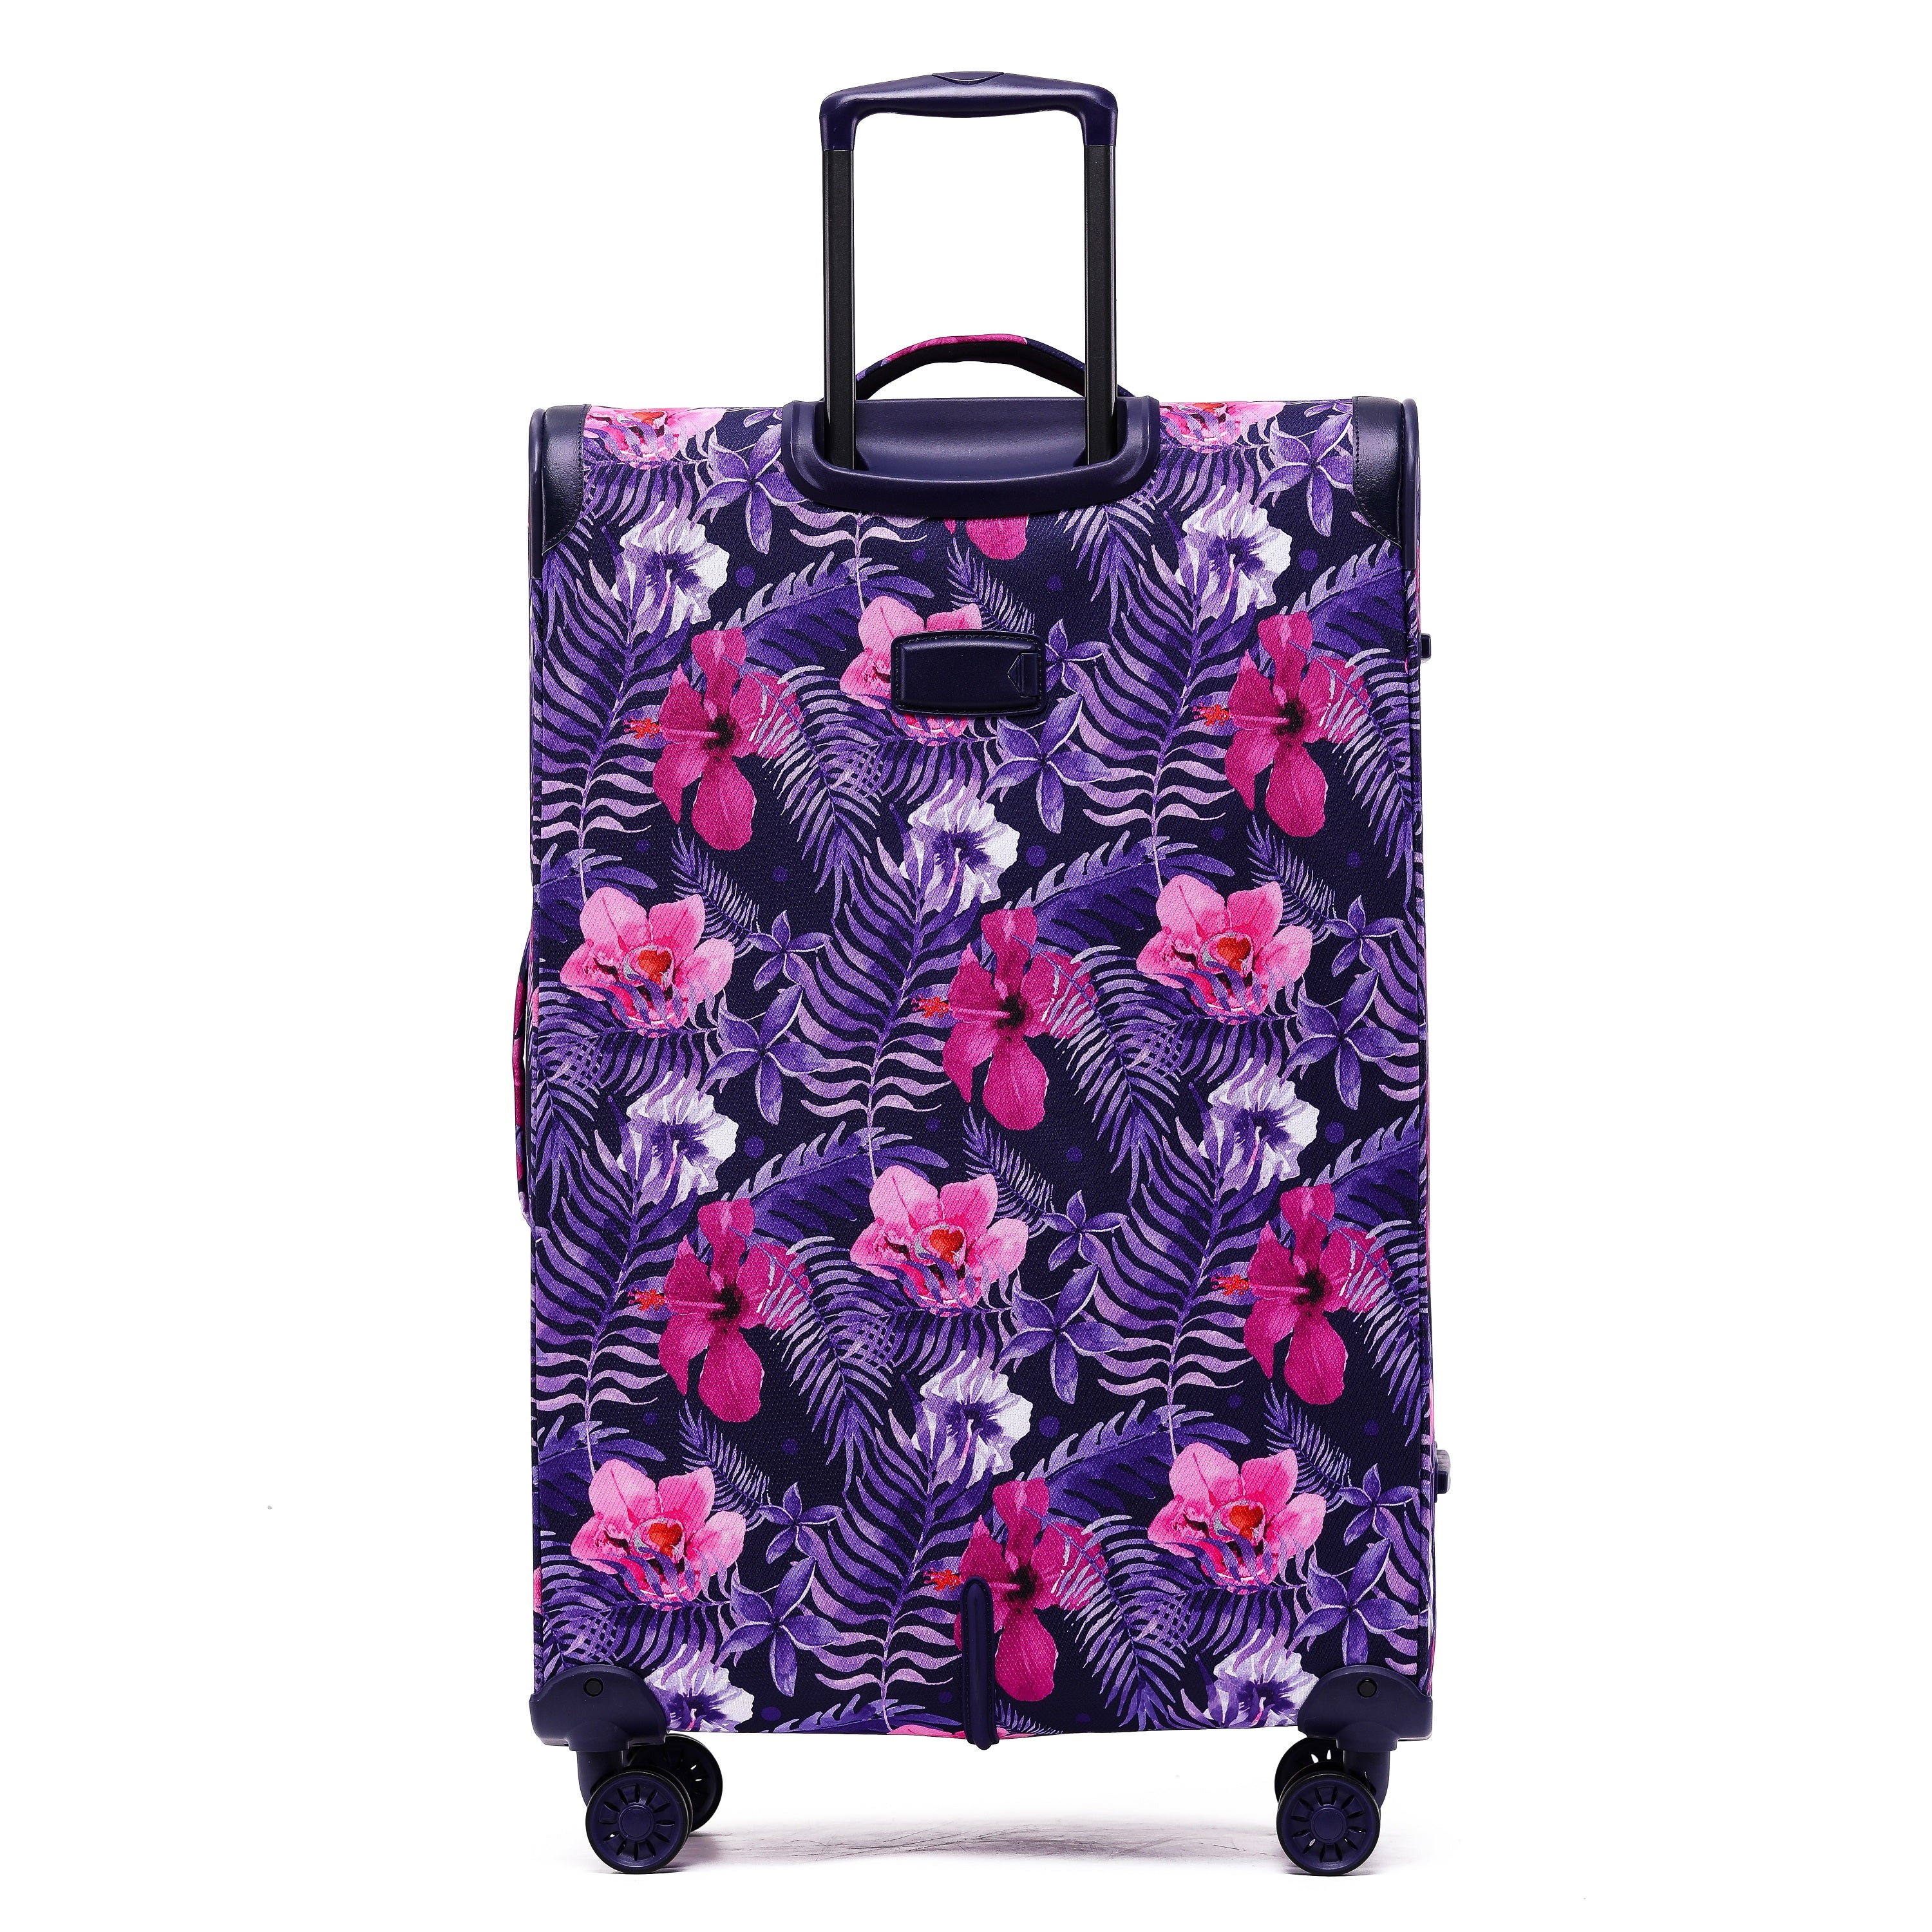 Tosca - So Lite 3.0 29in Large 4 Wheel Soft Suitcase - Flower-3